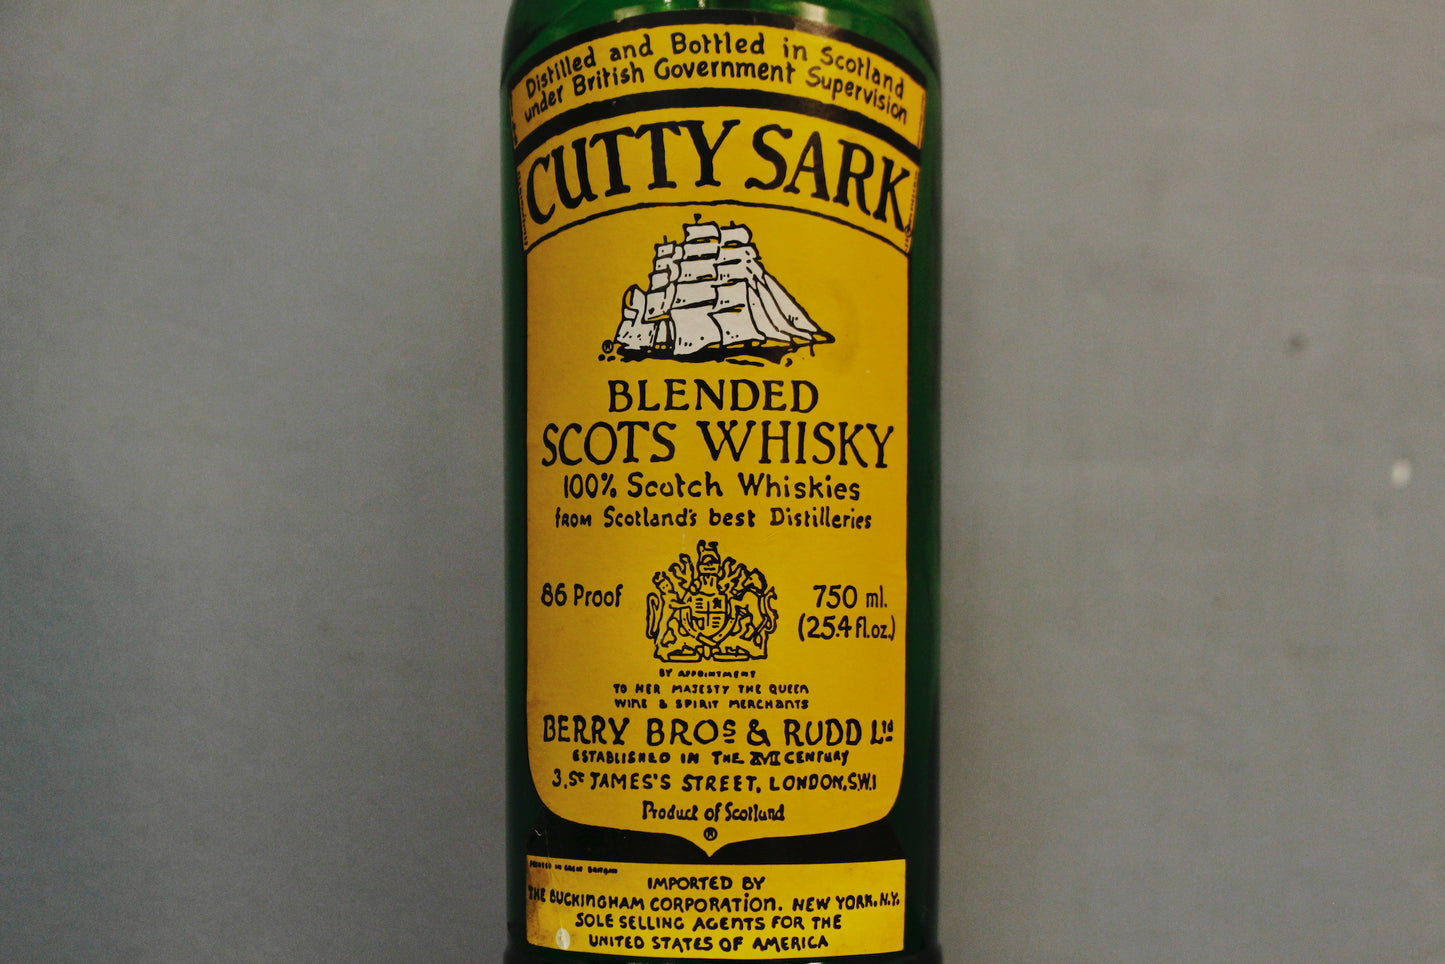 Cutty Sark Whisky Bottle Table Lamp